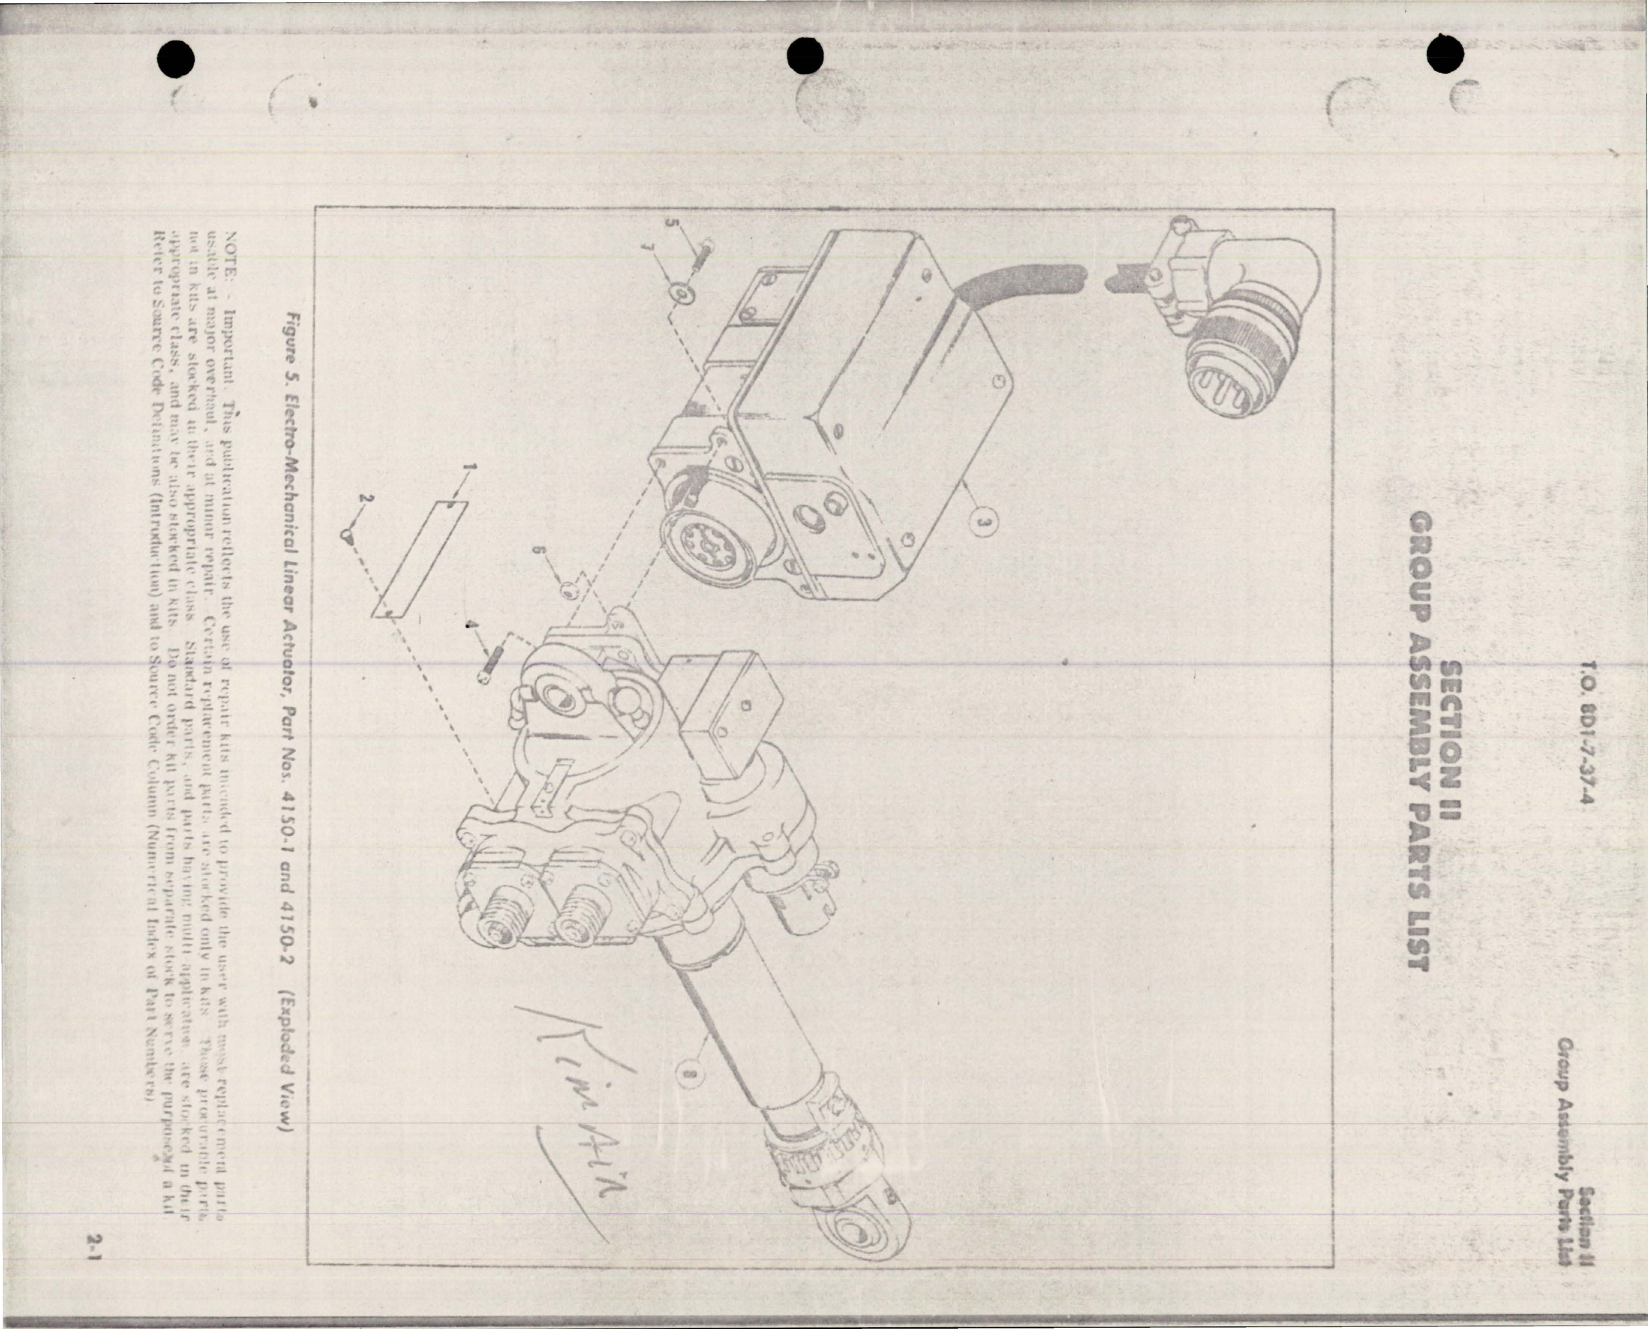 Sample page 7 from AirCorps Library document: Illustrated Parts Breakdown for Electro-Mechanical Linear Actuator - Parts 4150-1 and 4150-2 